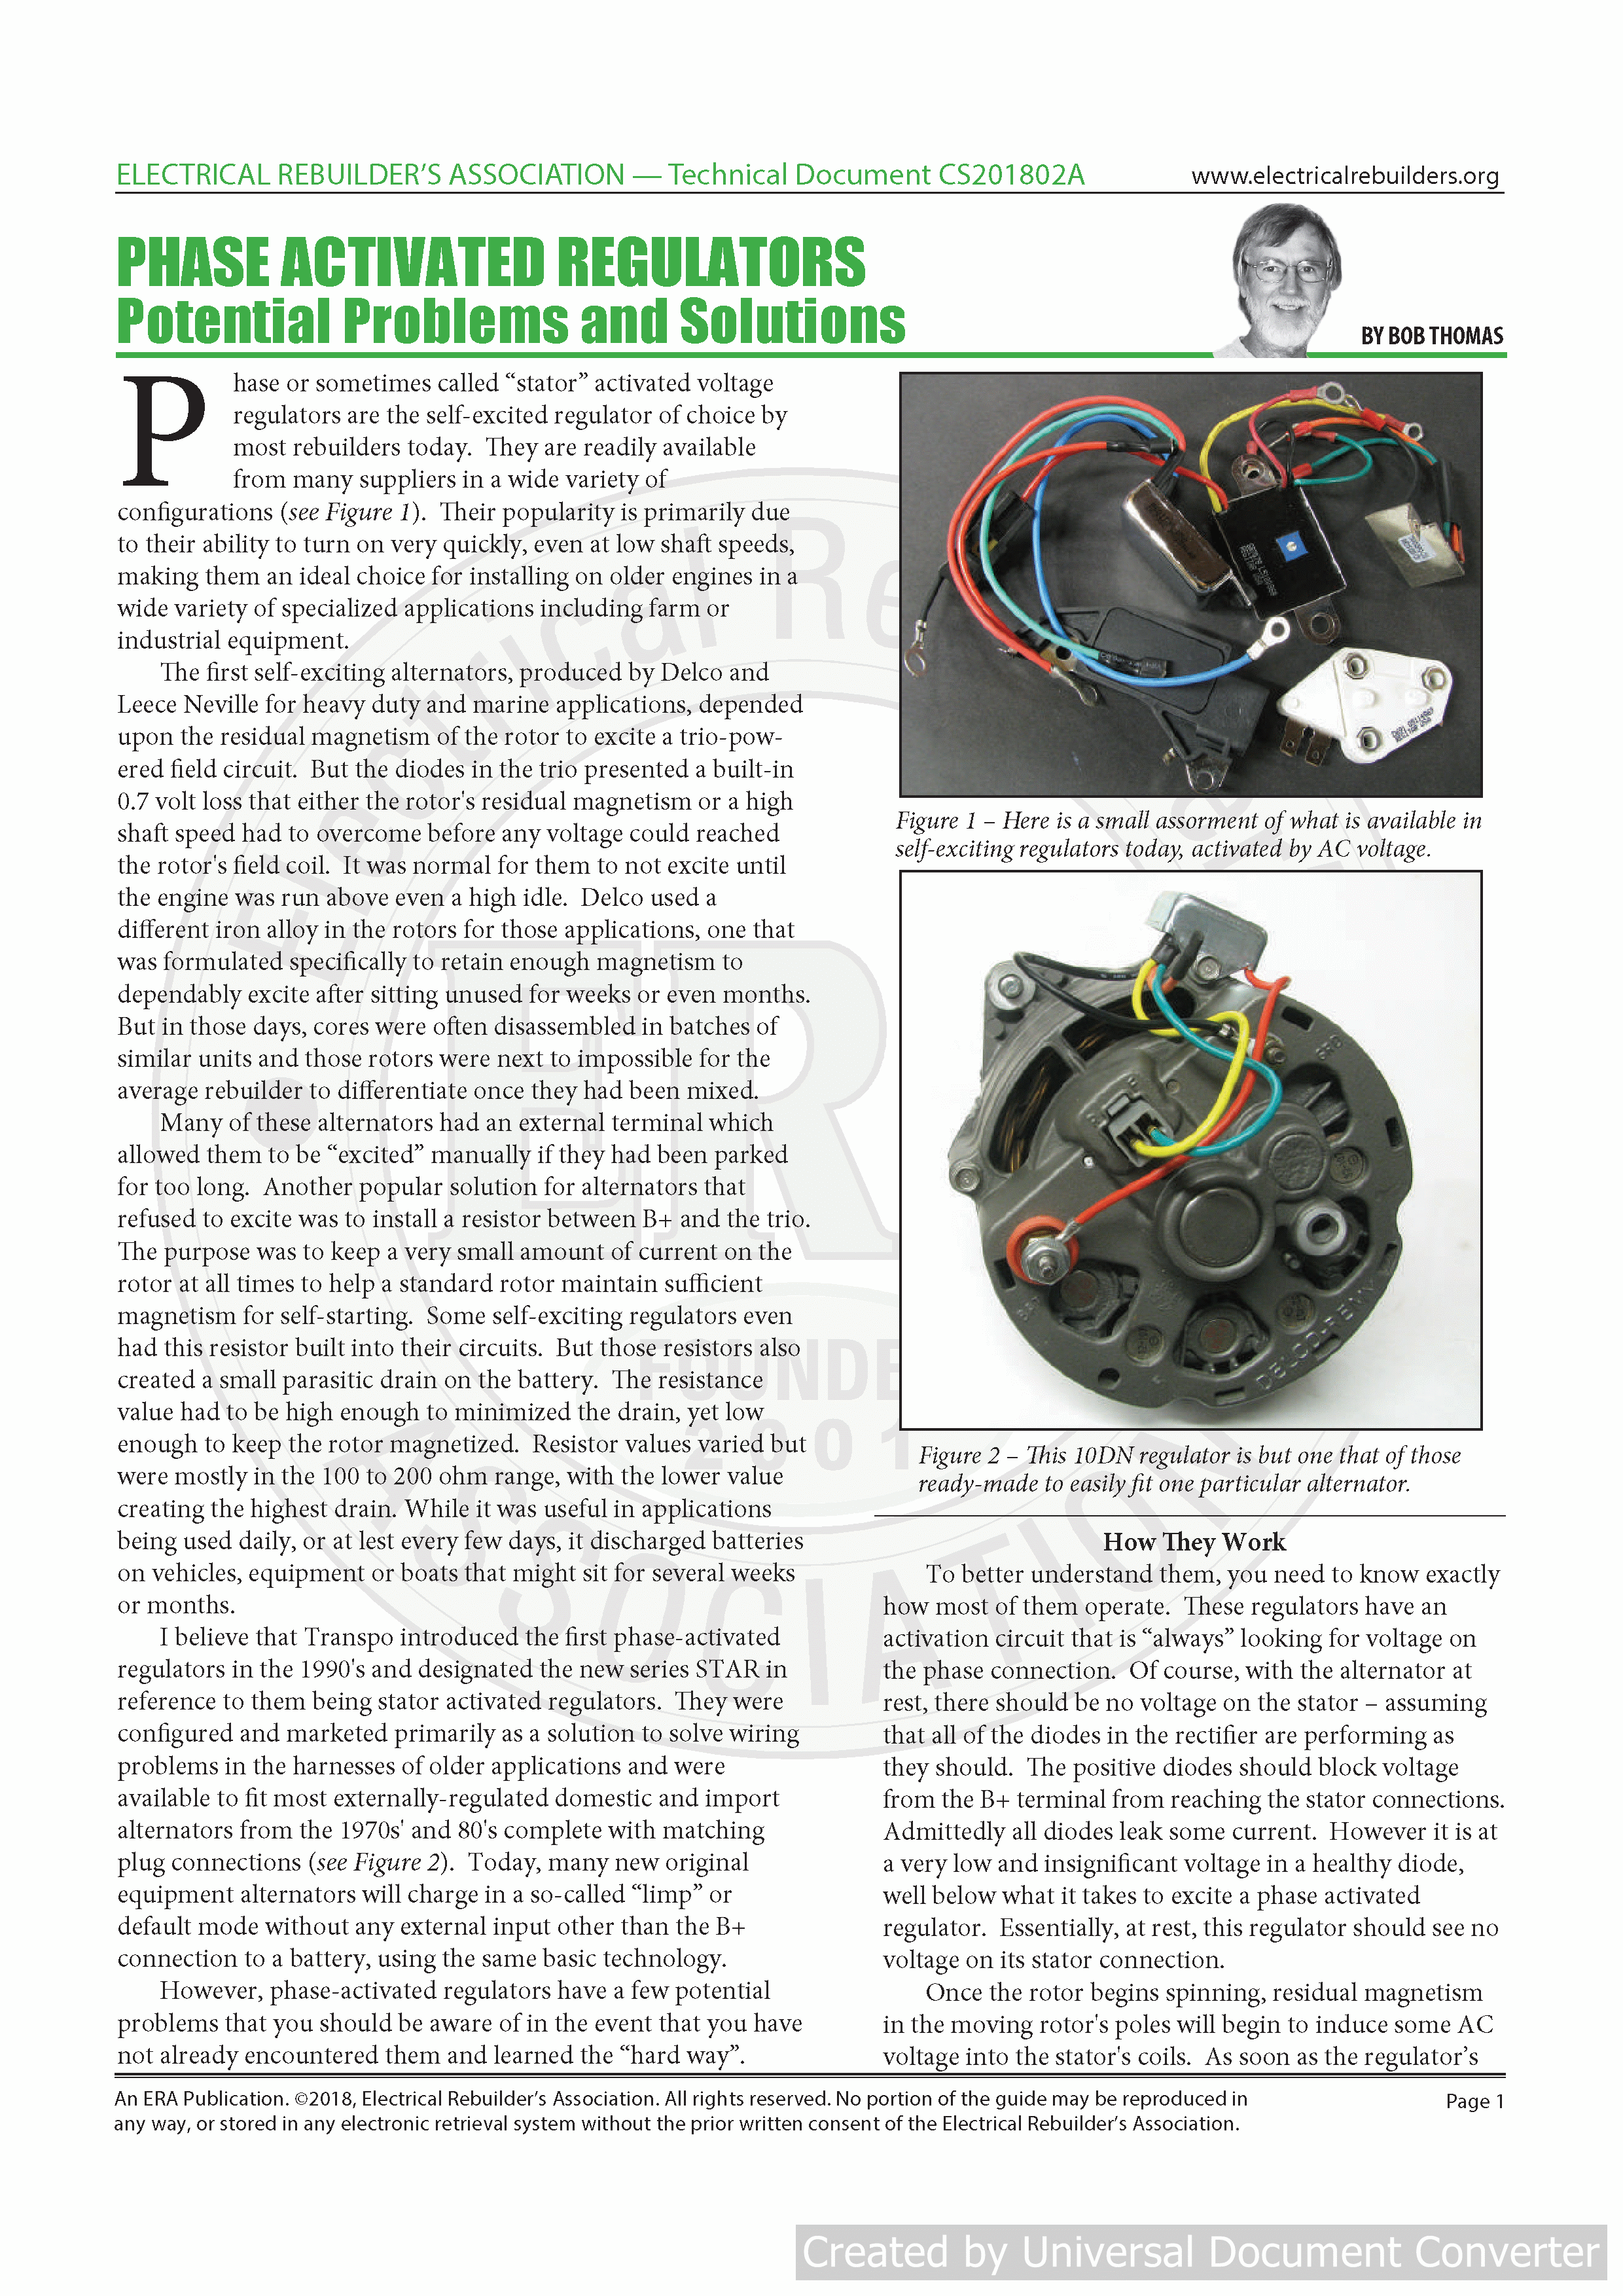 Article Image